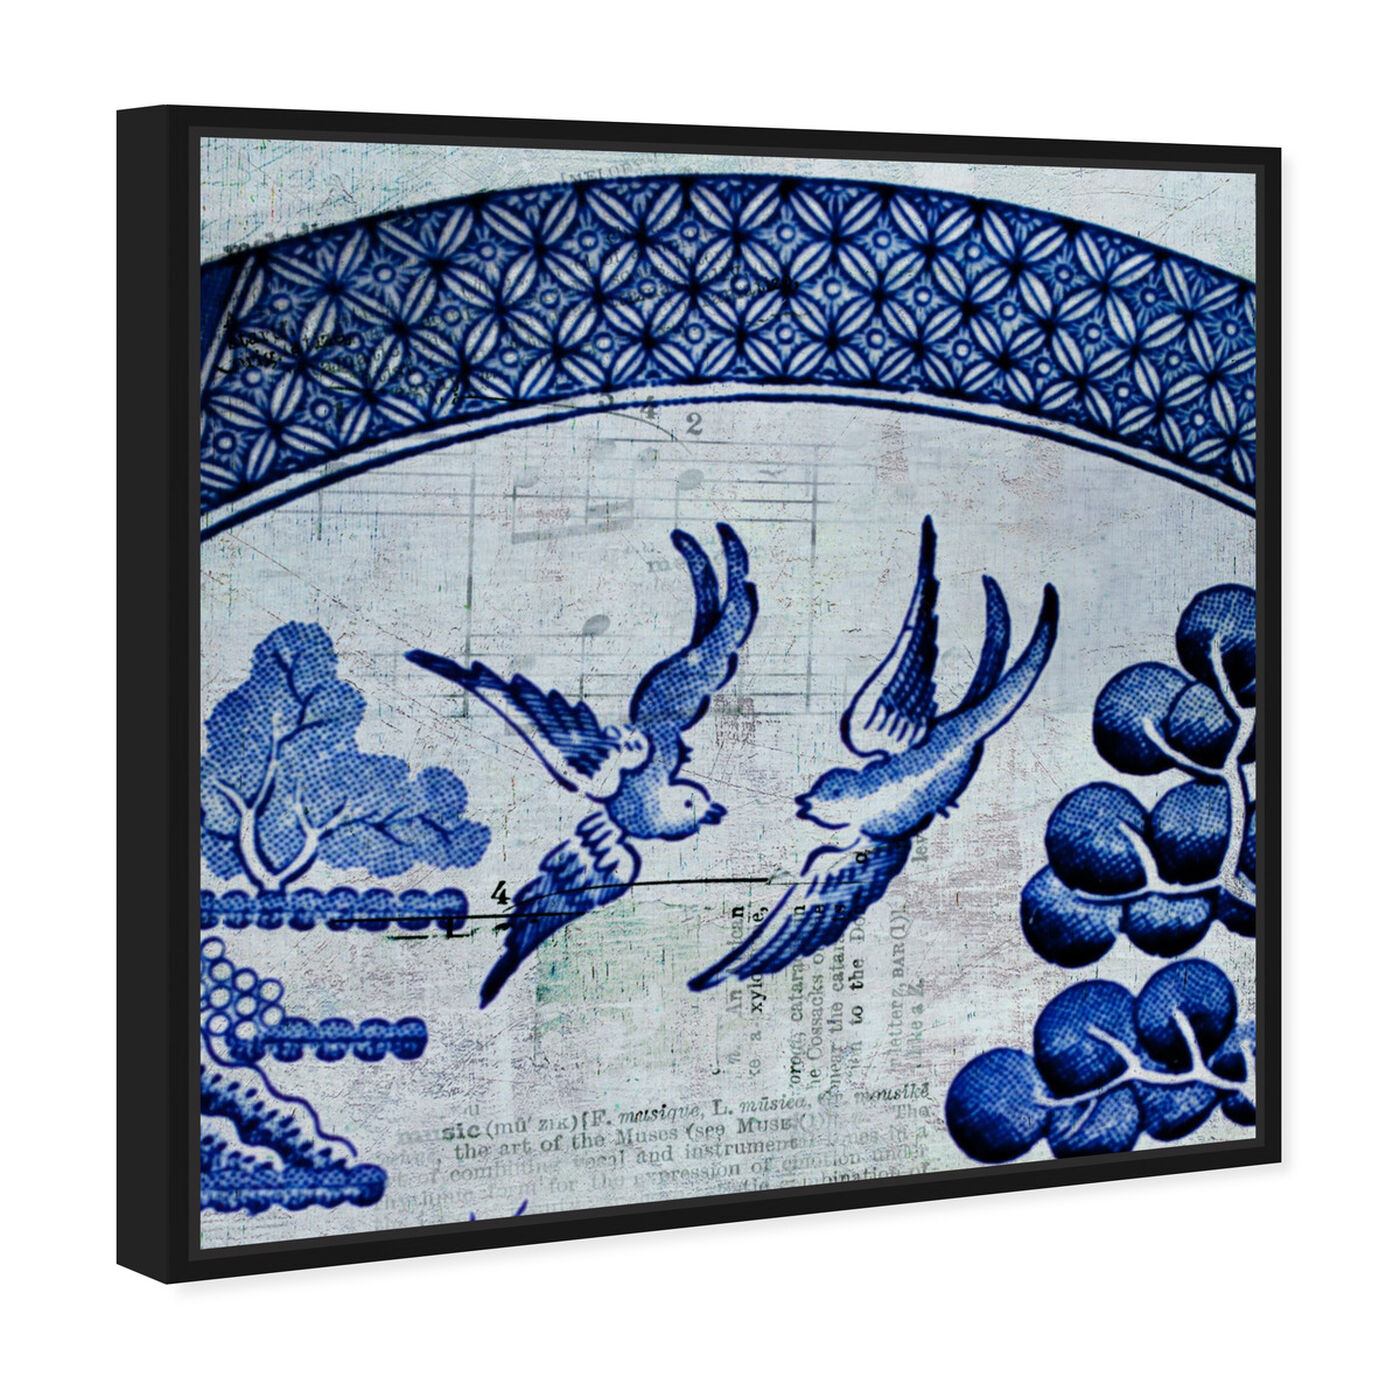 Angled view of China Birds featuring animals and birds art.